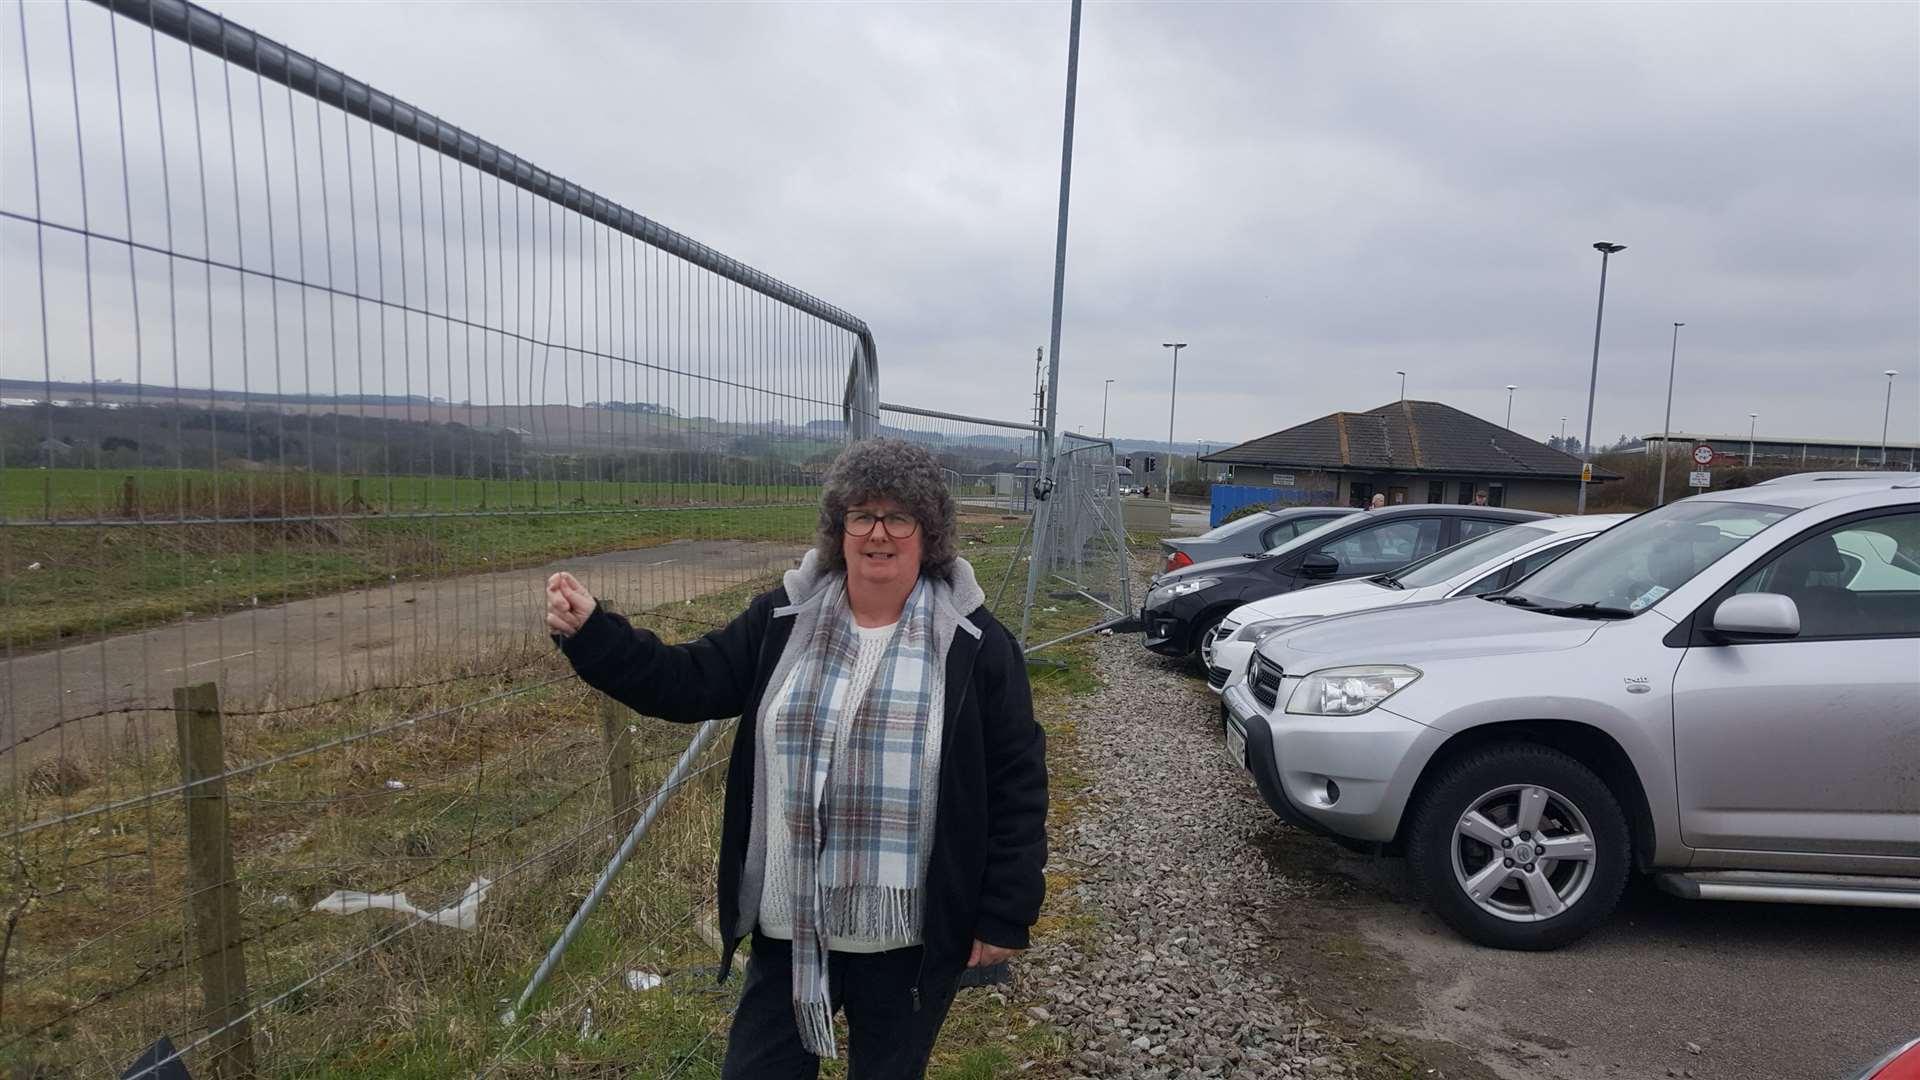 Councillor Gillian Owen has continued to press for works to be completed.